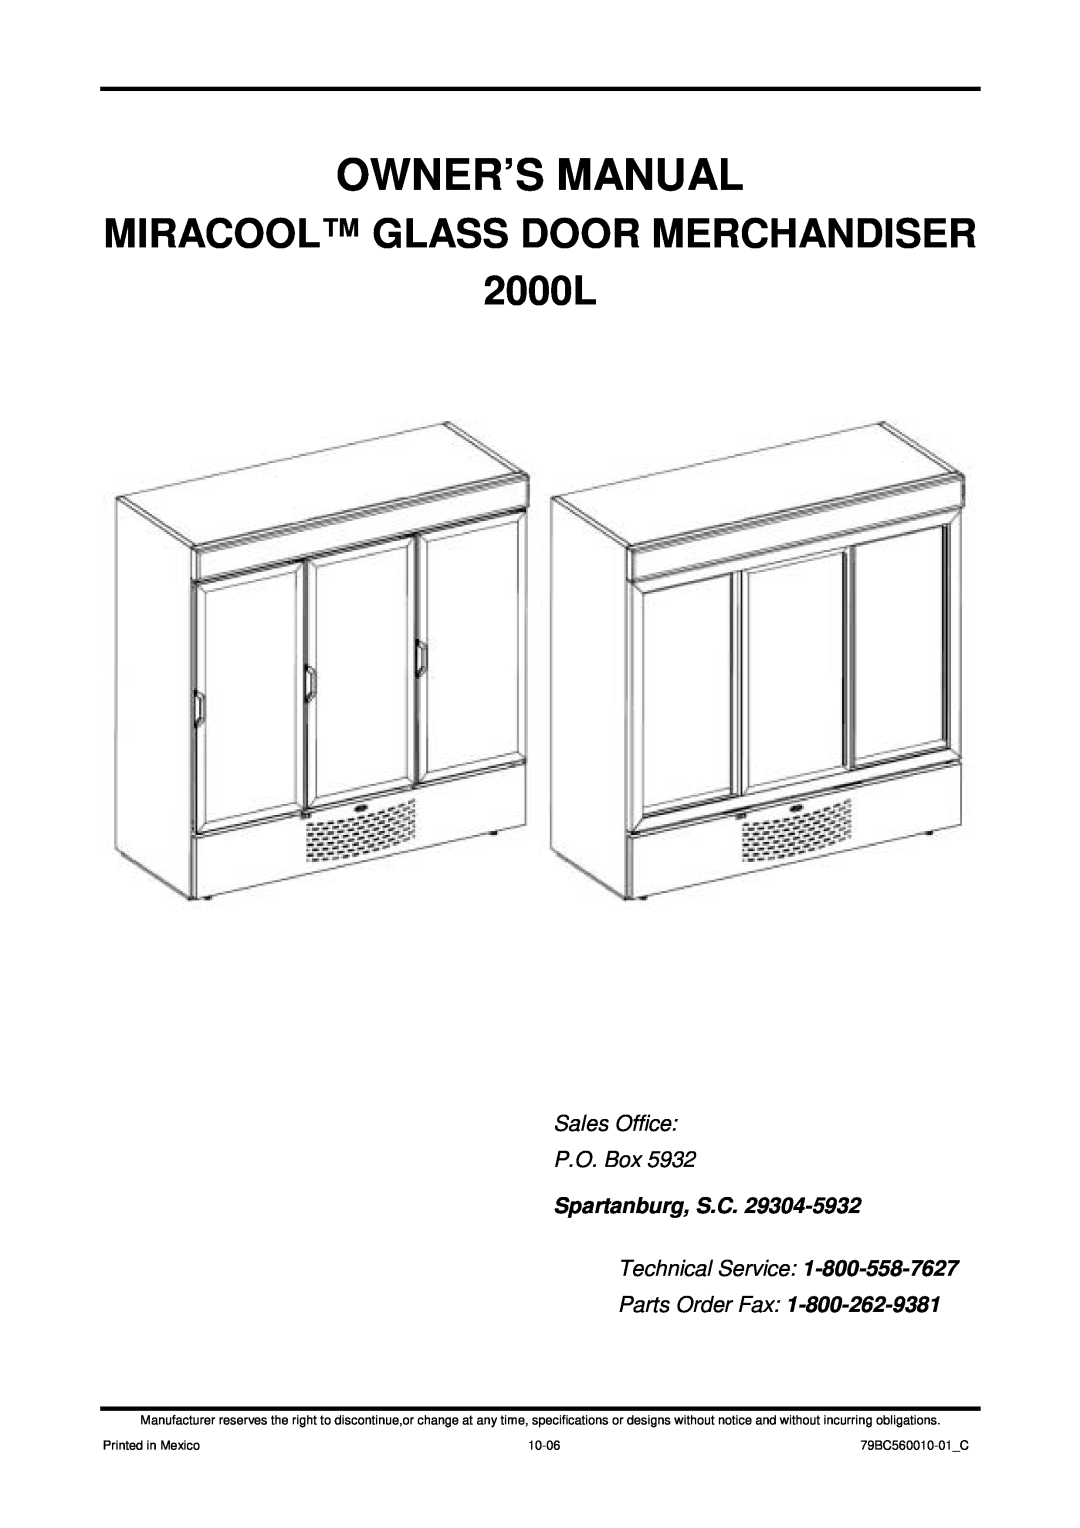 Carrier Miracool owner manual Owner’S Manual, MIRACOOL GLASS DOOR MERCHANDISER 2000L, Sales Office P.O. Box, 10-06 